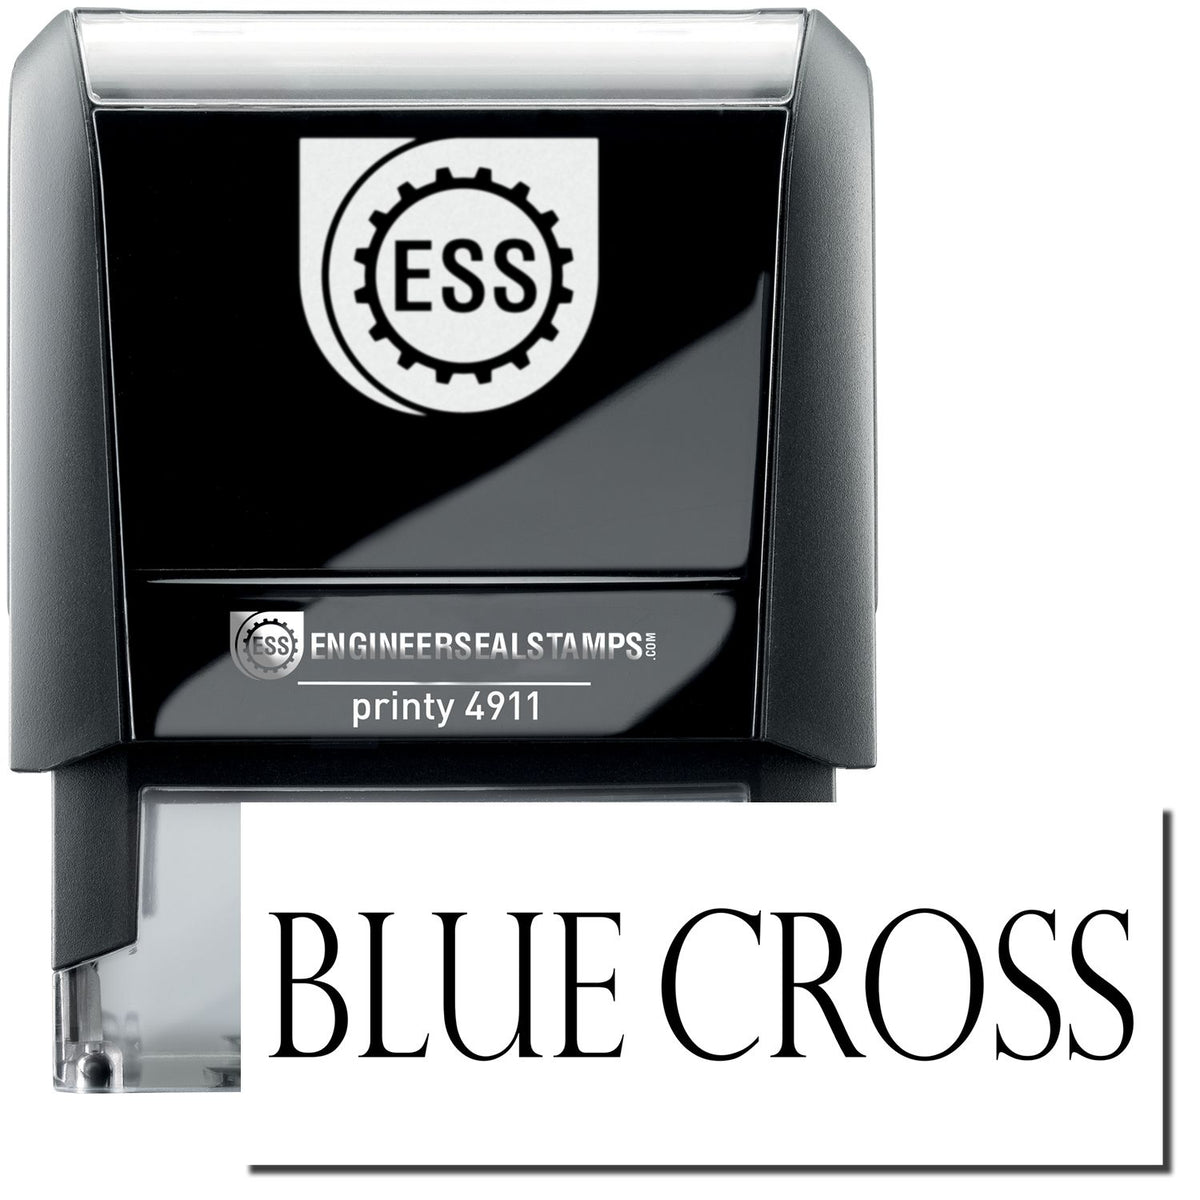 A self-inking stamp with a stamped image showing how the text &quot;BLUE CROSS&quot; is displayed after stamping.